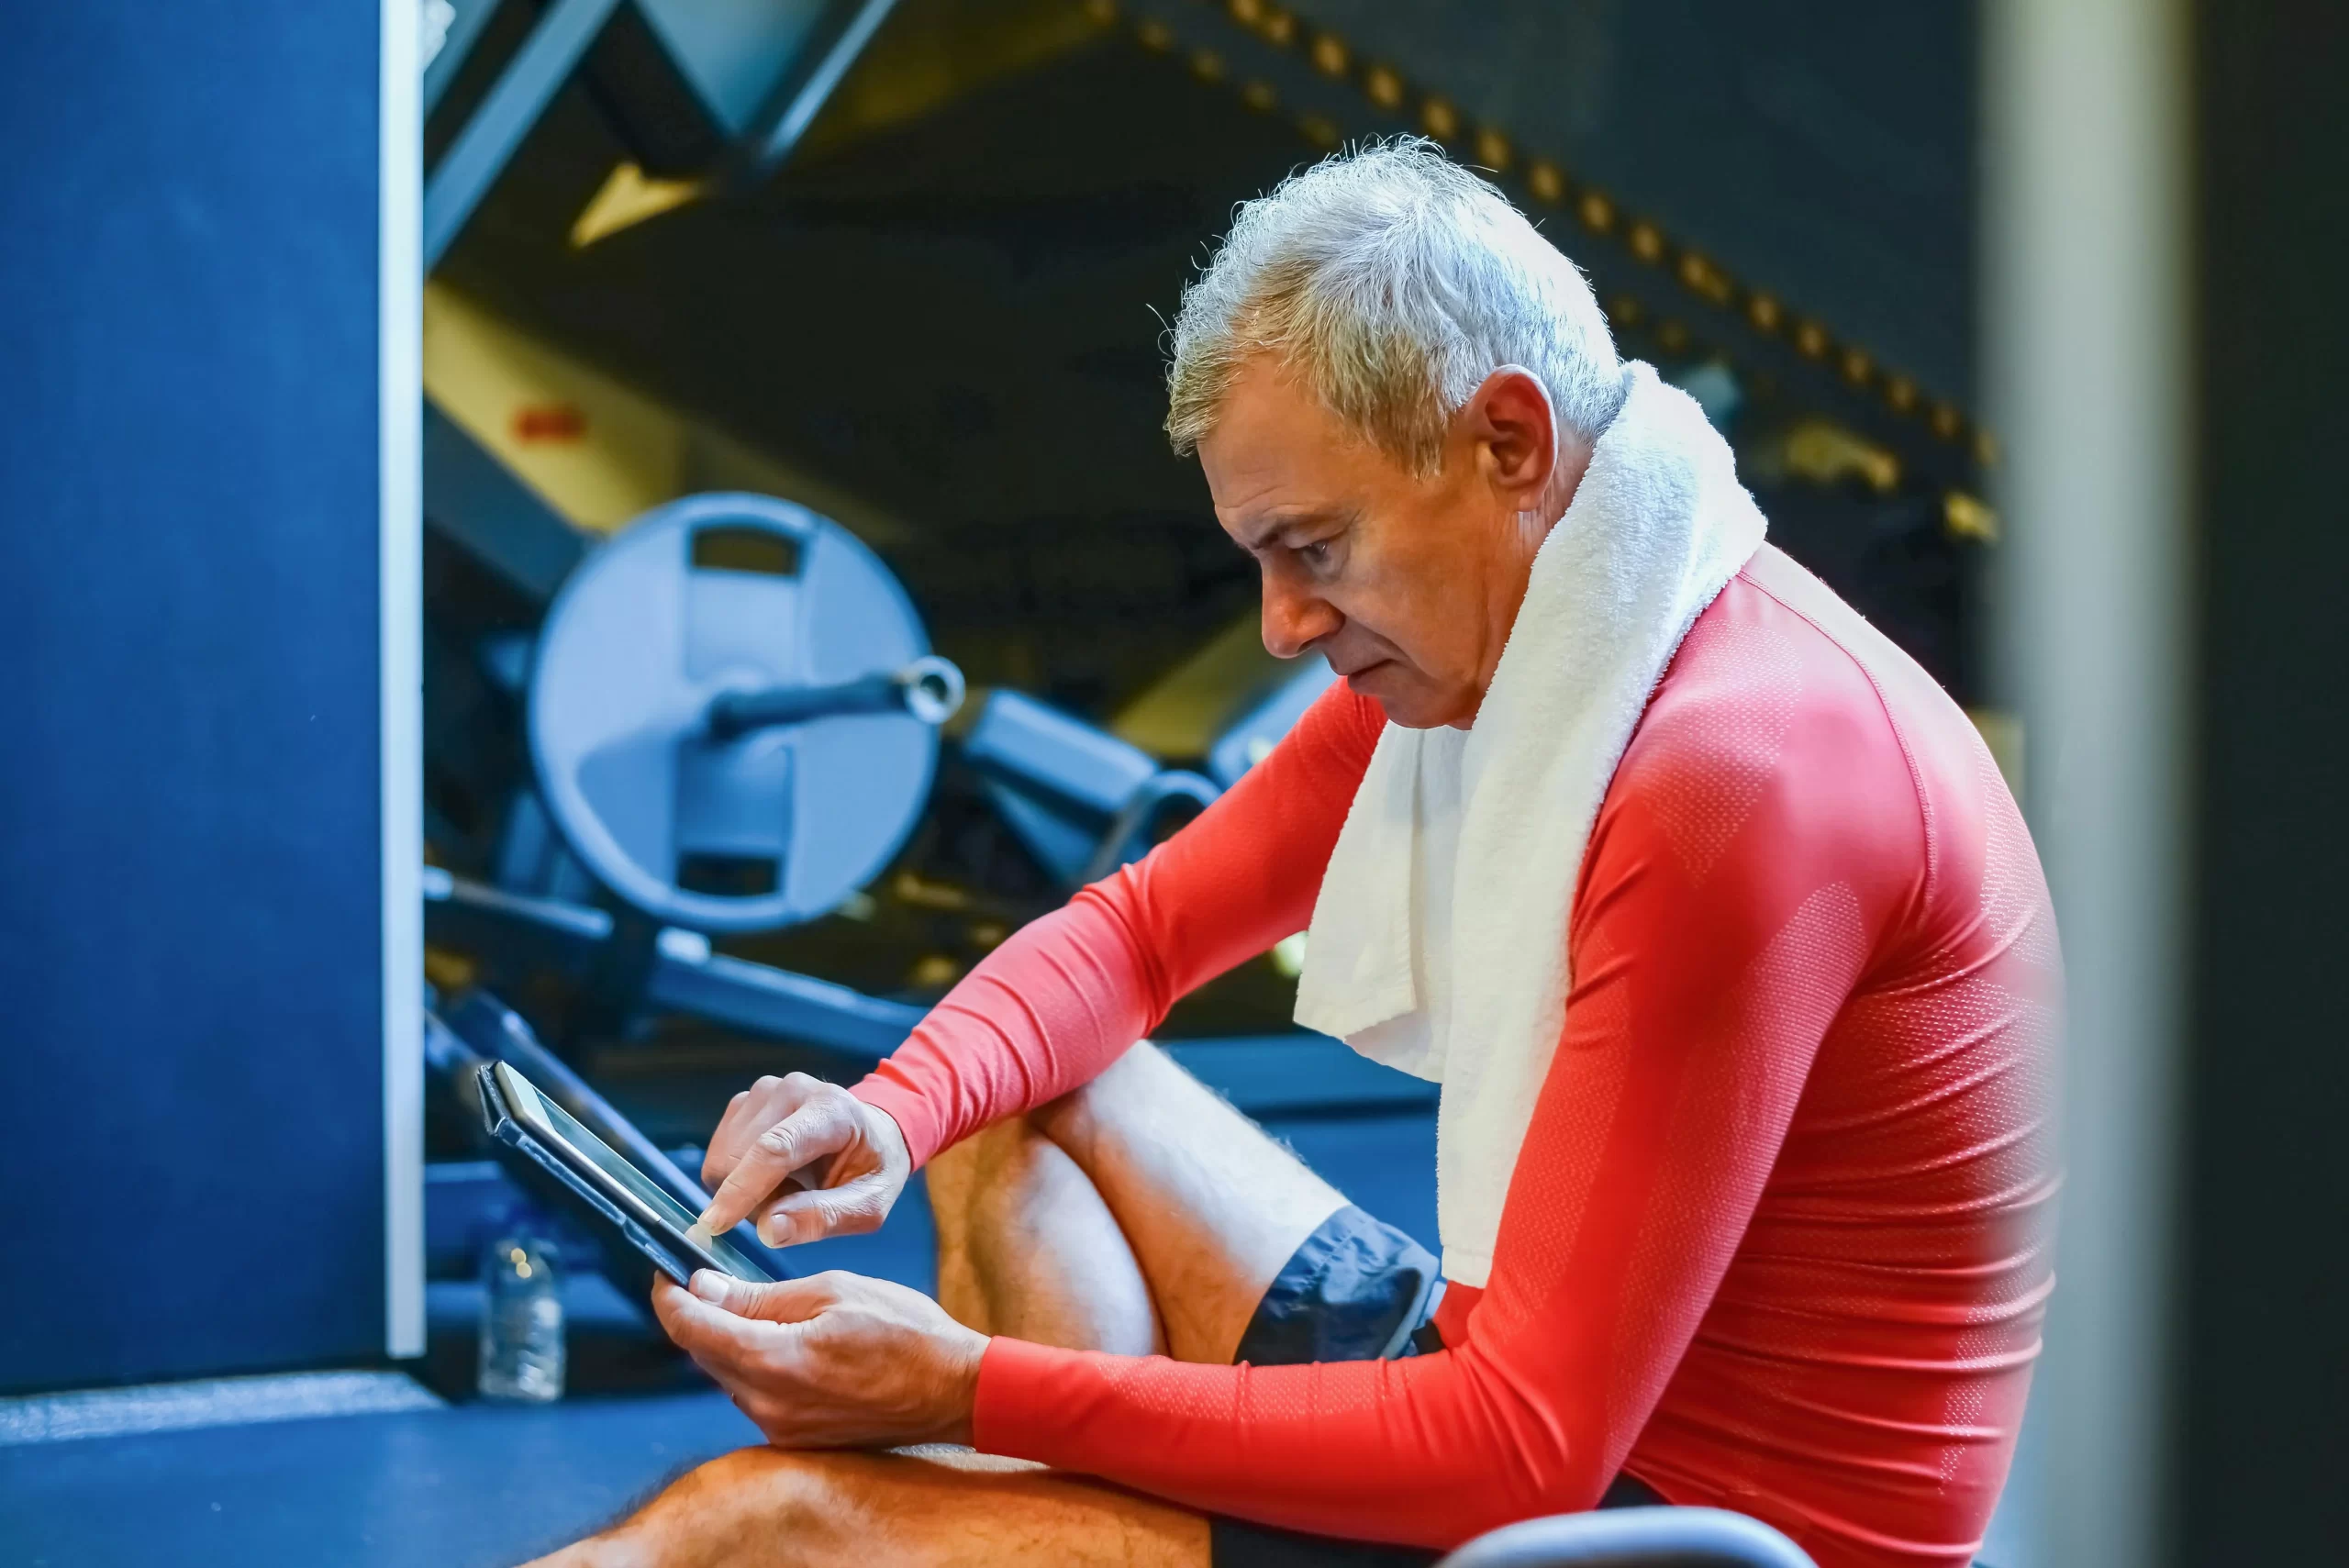 old person over 40 working out and checking a program in the gym